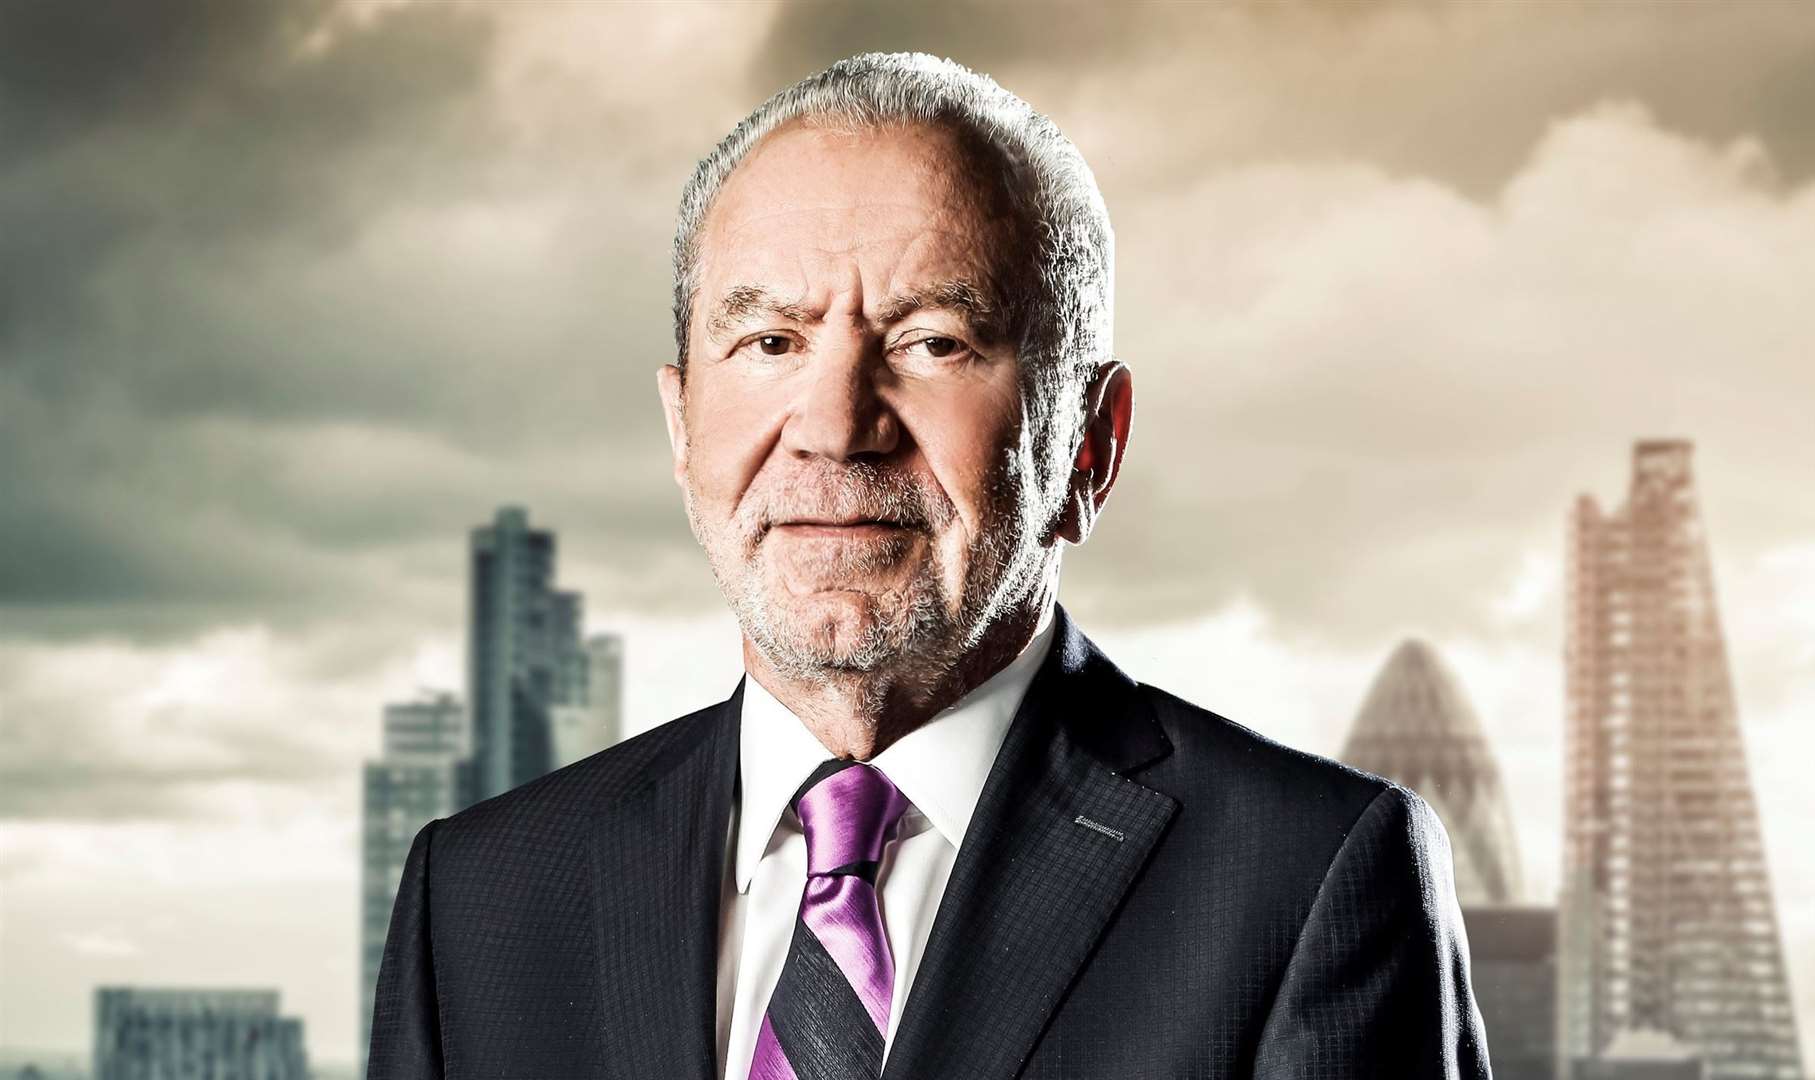 Lord Sugar has said he’ll step down after 20 years at the helm of the show. Picture: BBC